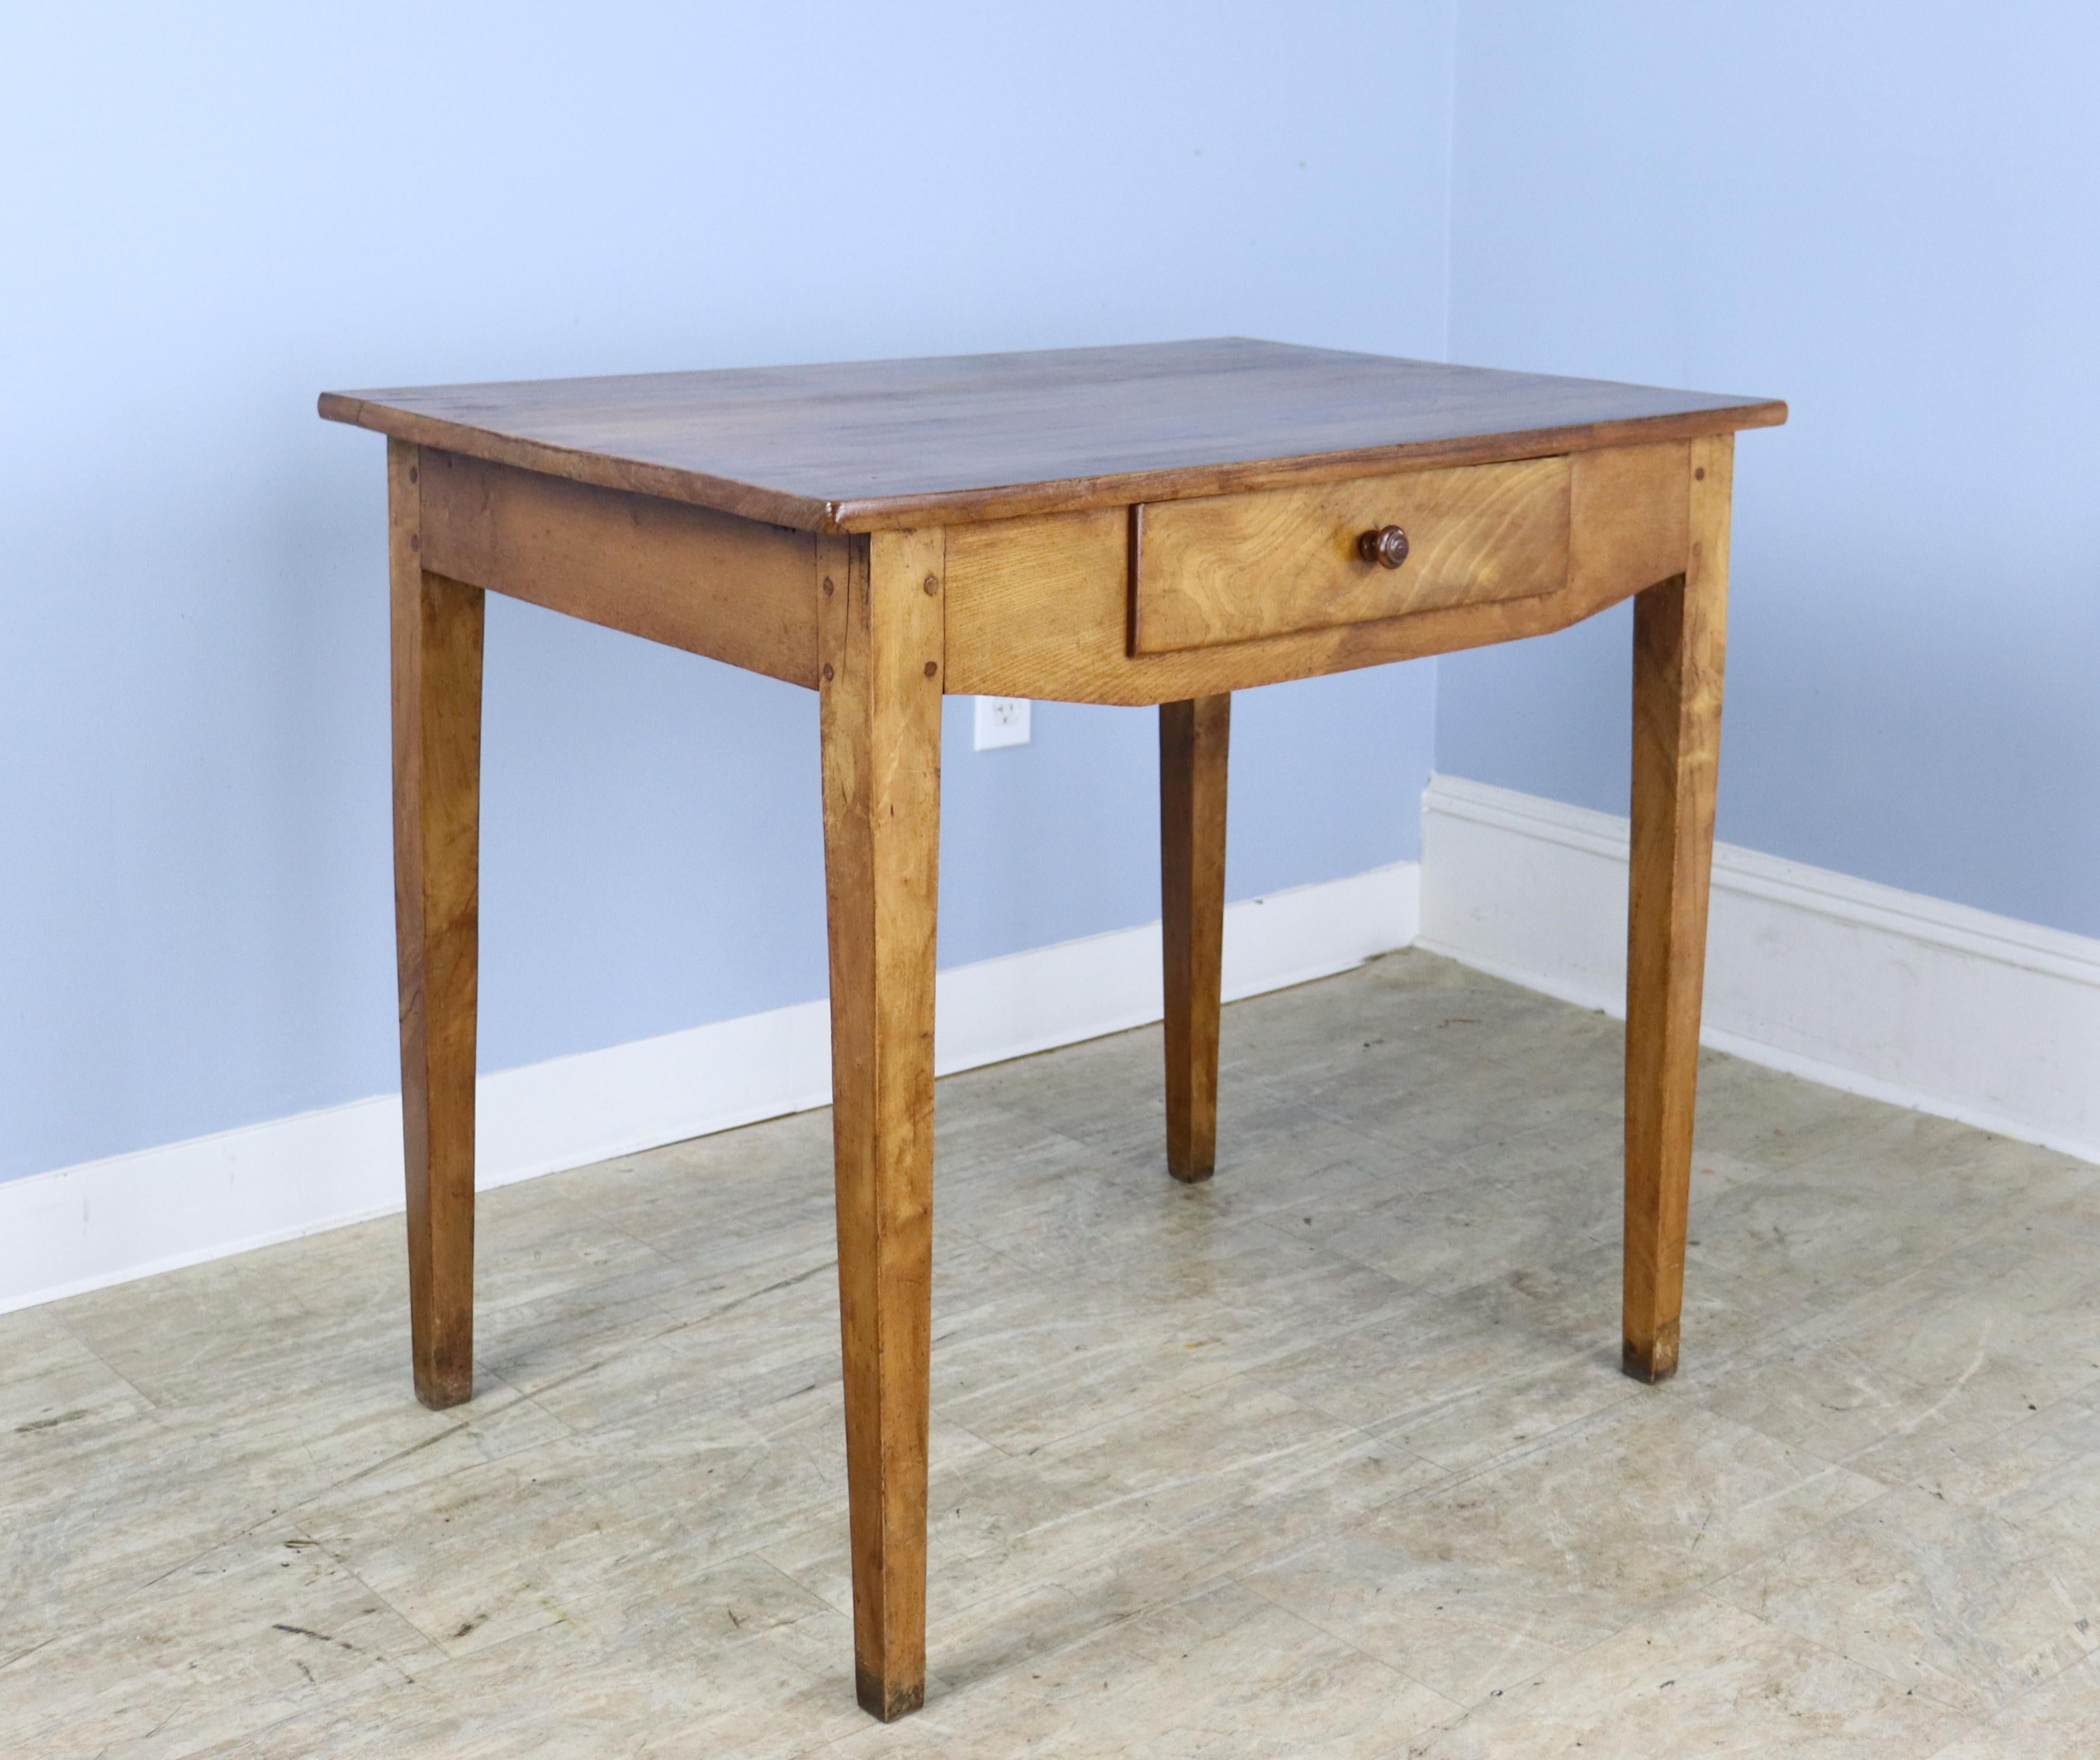 A simple and elegant fruitwood side table or small writing table/desk. The top has lovely grain and patina. Classic tapered legs, pegged at the apron. Single drawer for storage. The stylized front section has an apron height of 24.5 inches, and the